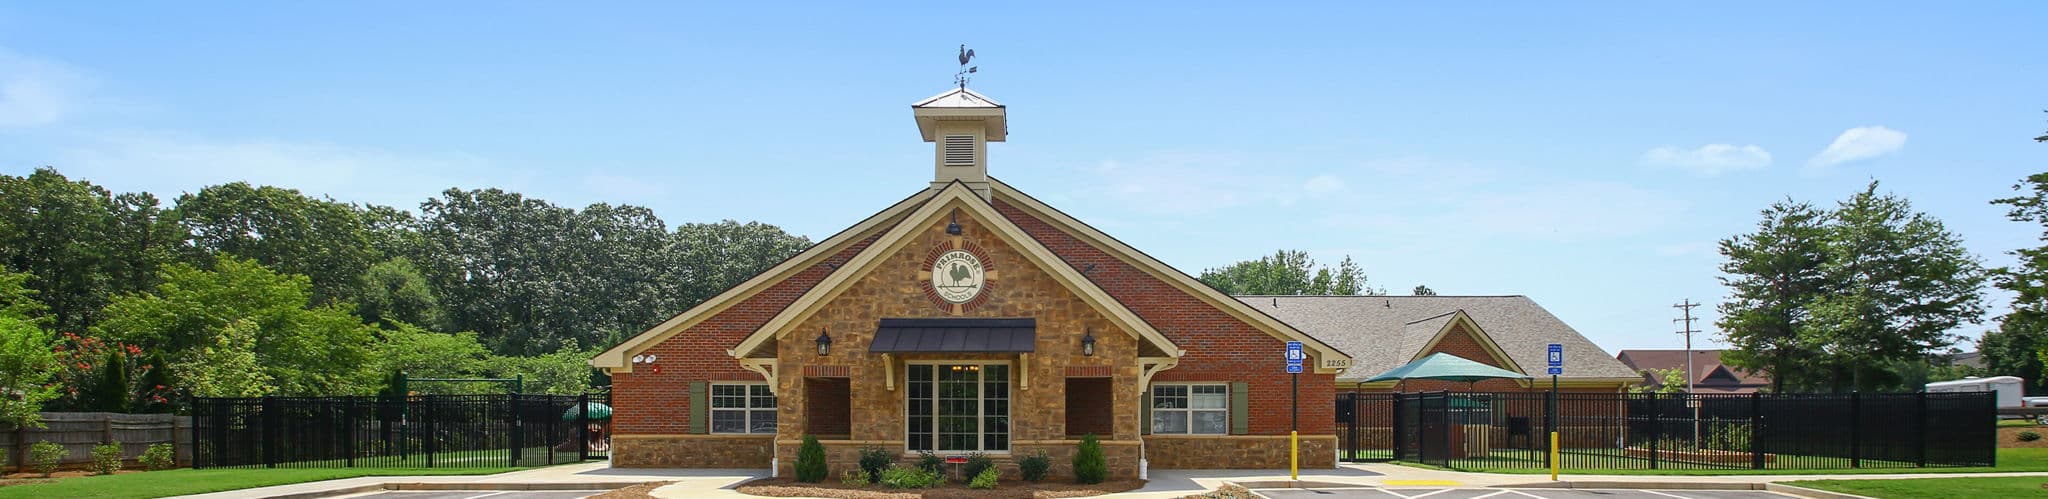 Exterior of a Primrose School of Simpsonville at Five Forks